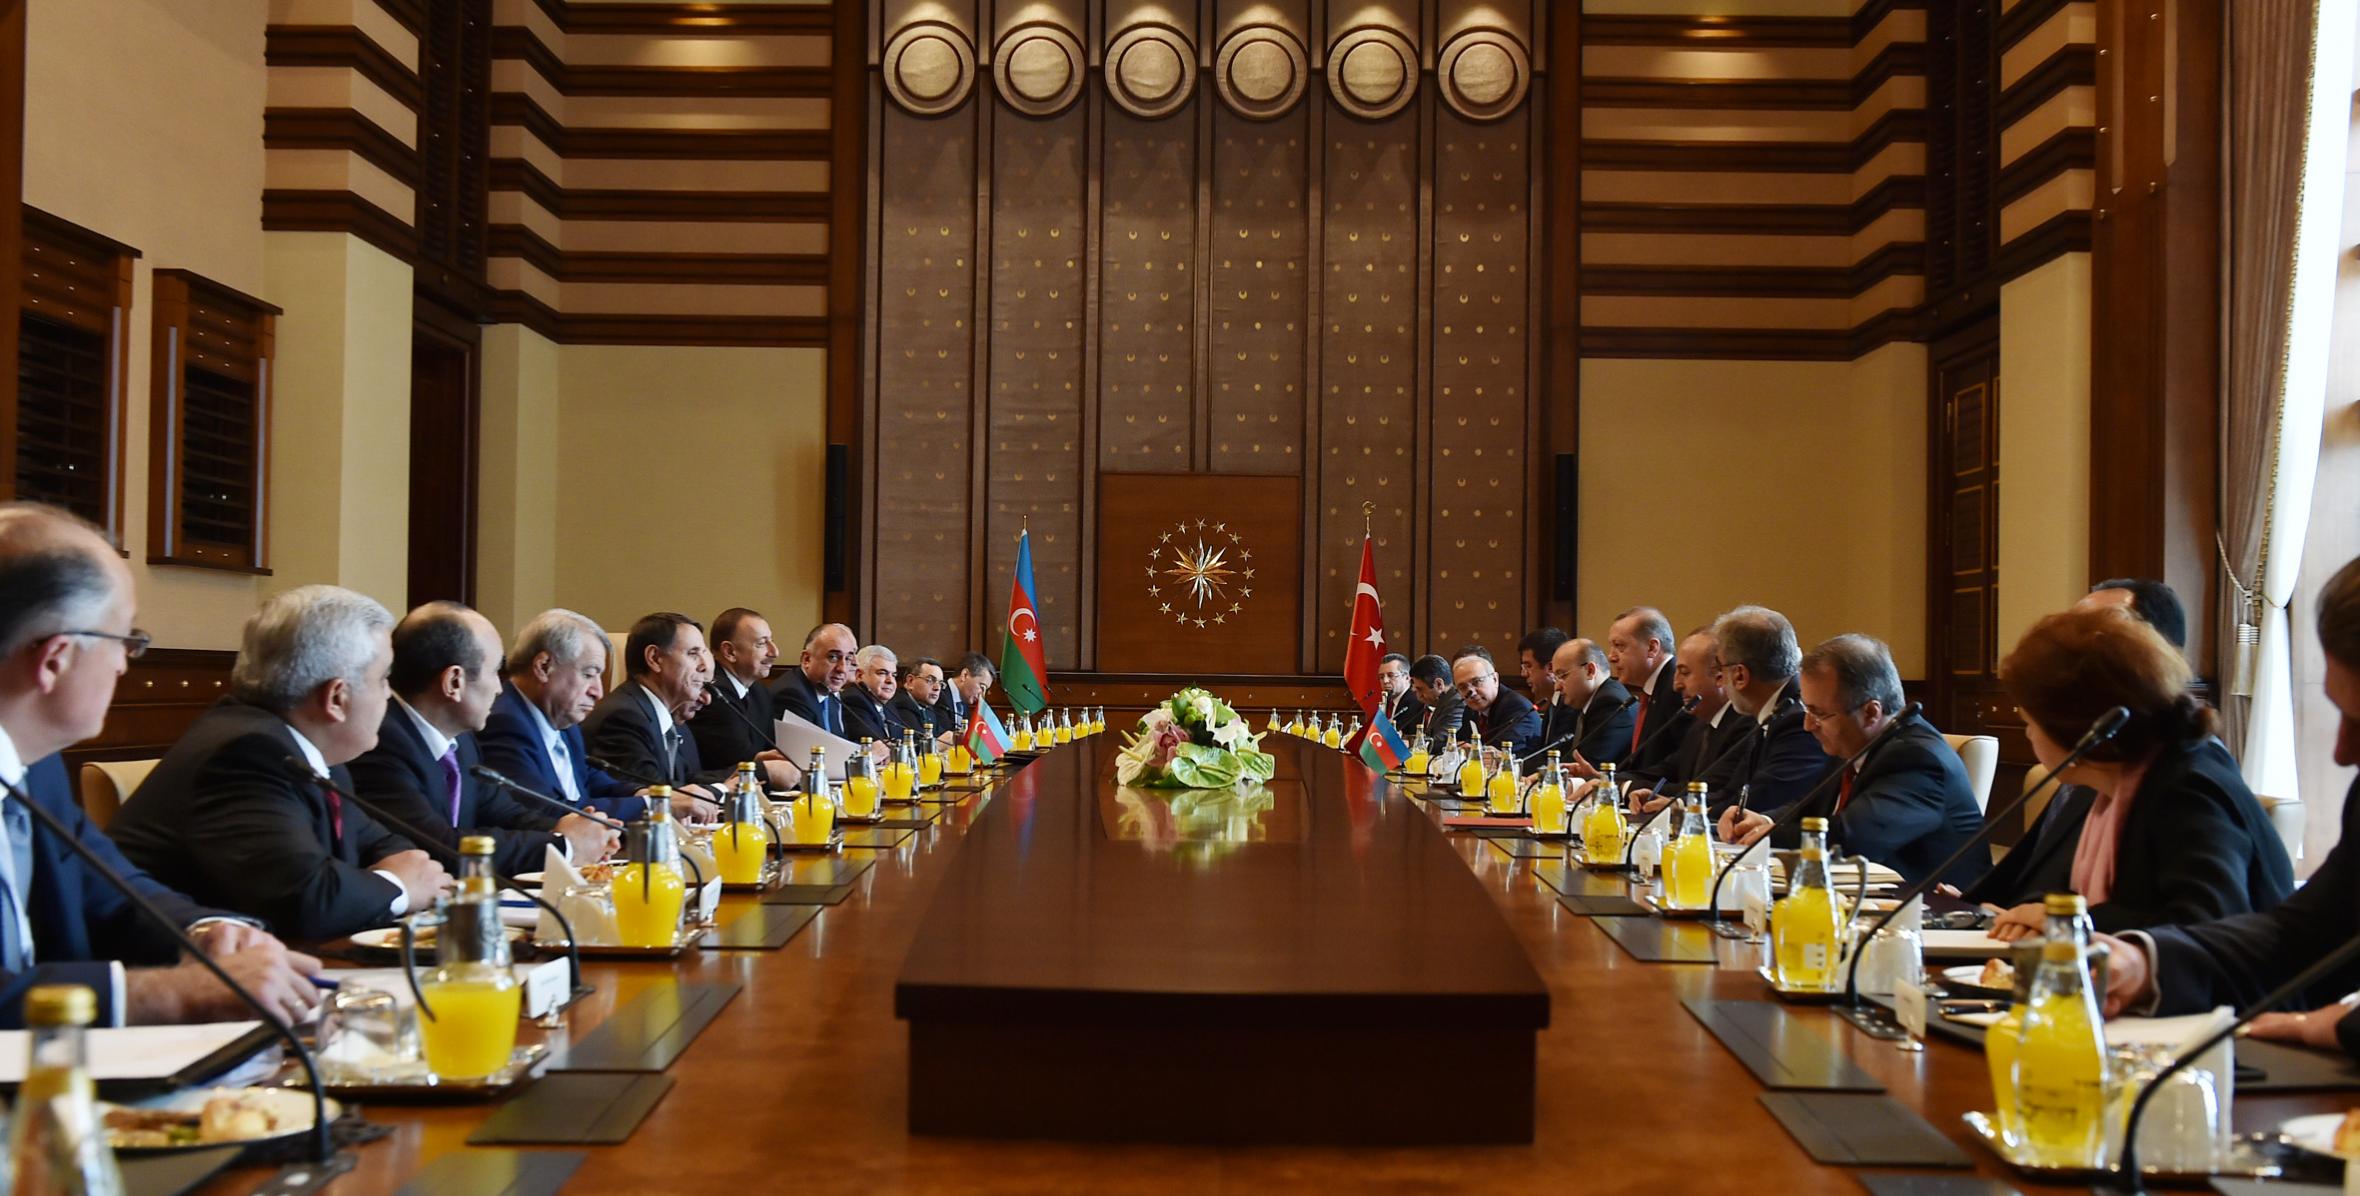 The 4th session of the Turkish-Azerbaijani High-Level Strategic Cooperation Council held